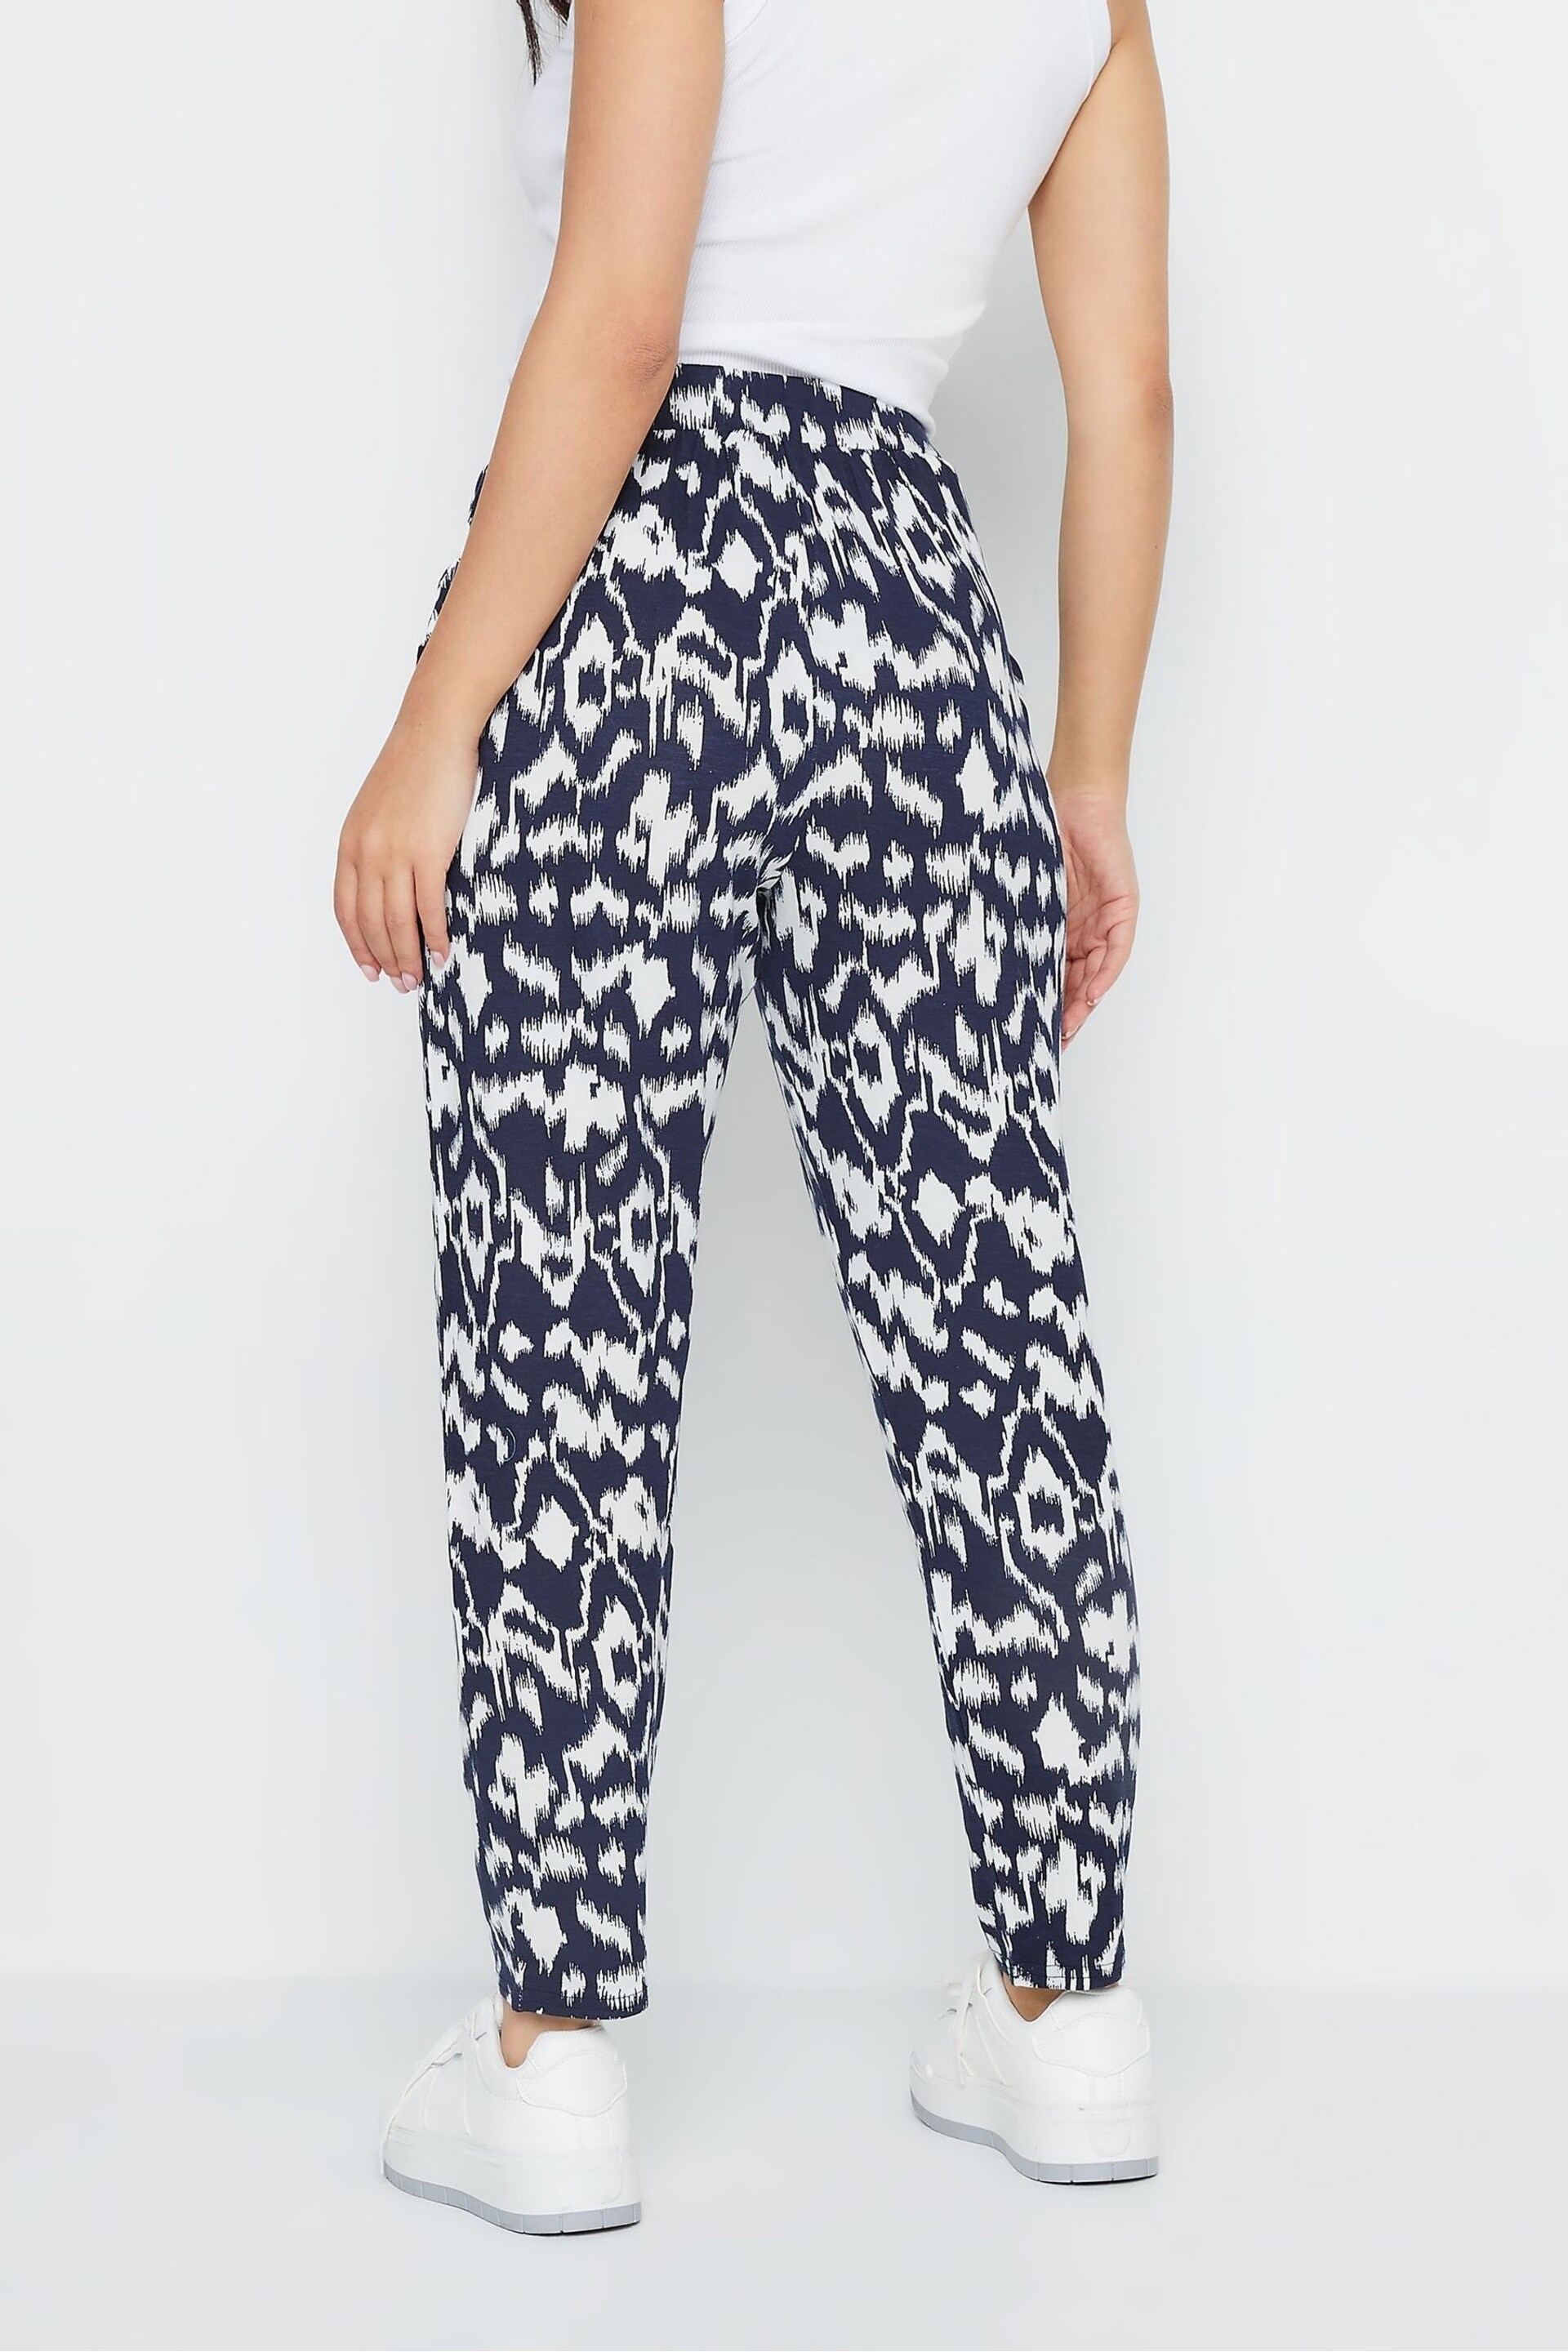 PixieGirl Petite Blue Abstract Harem Trousers - Image 2 of 5